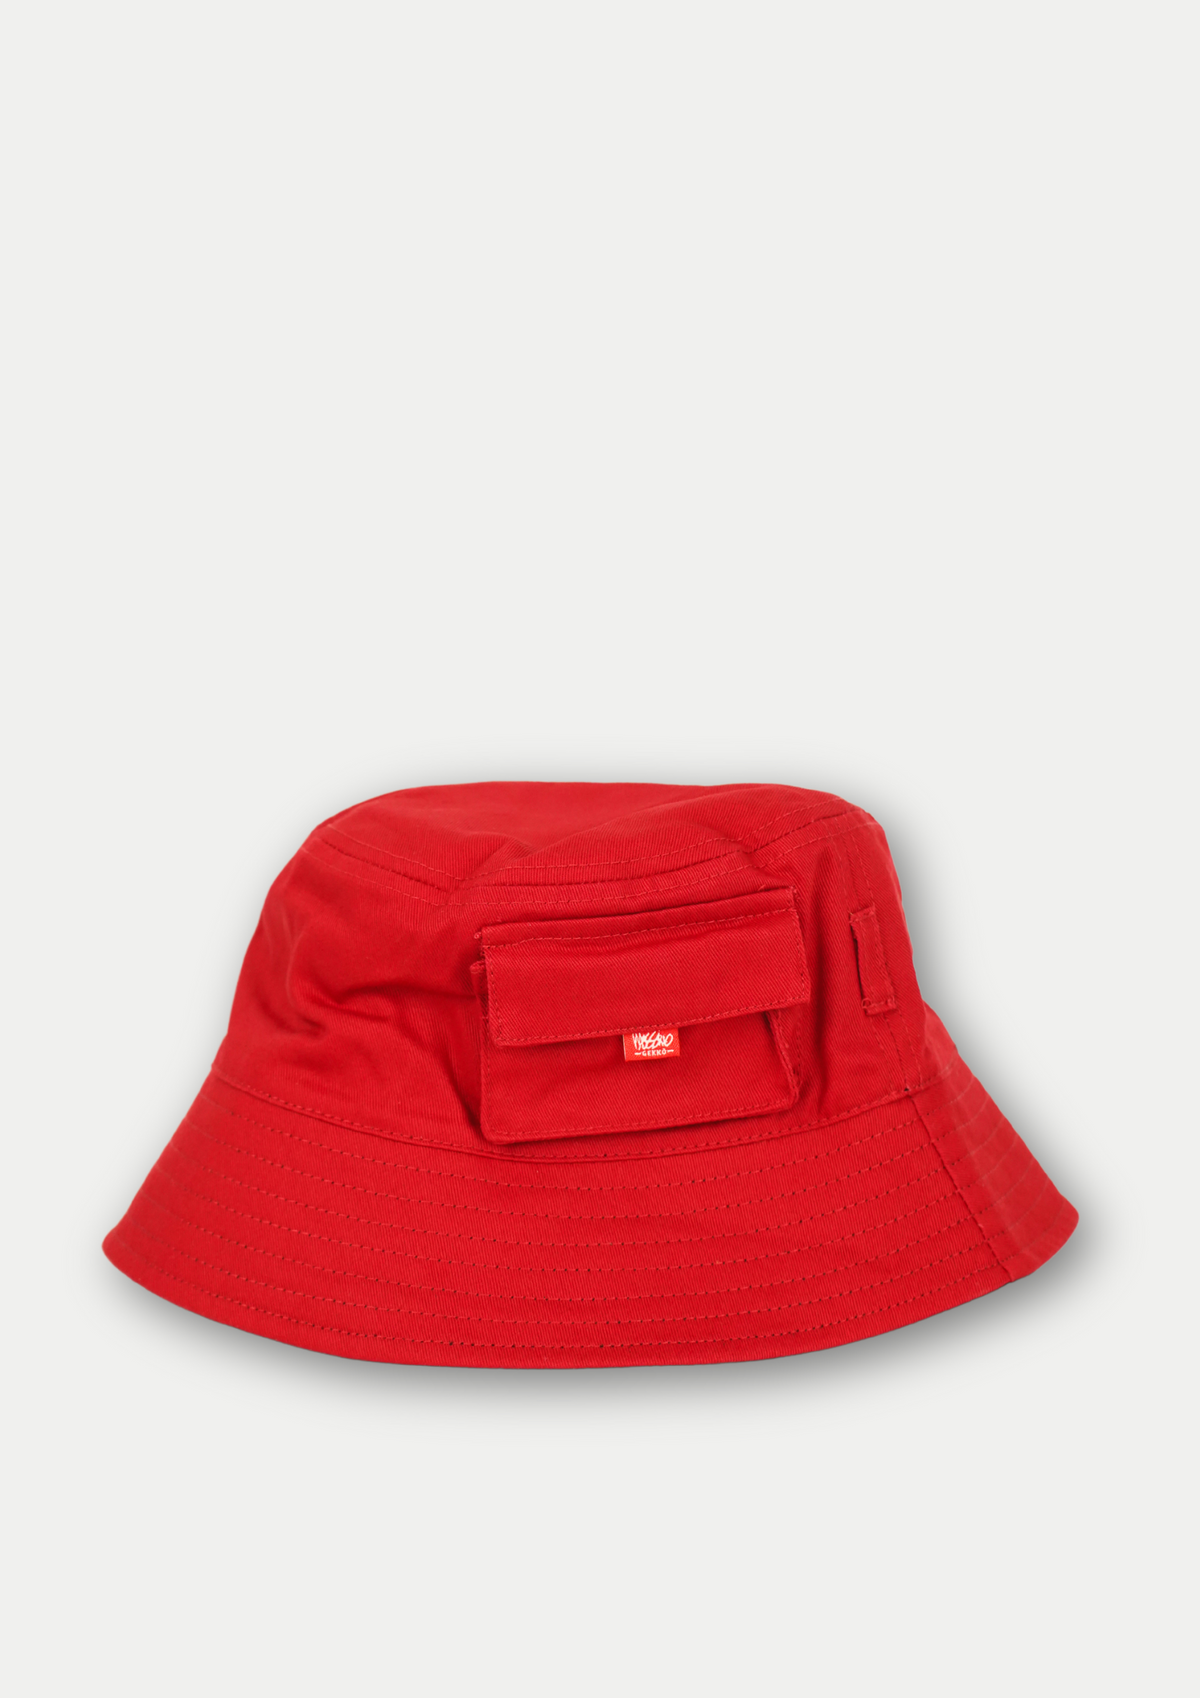 Mossimo Gekko Red Black Bucket Hat with Pencil Holder